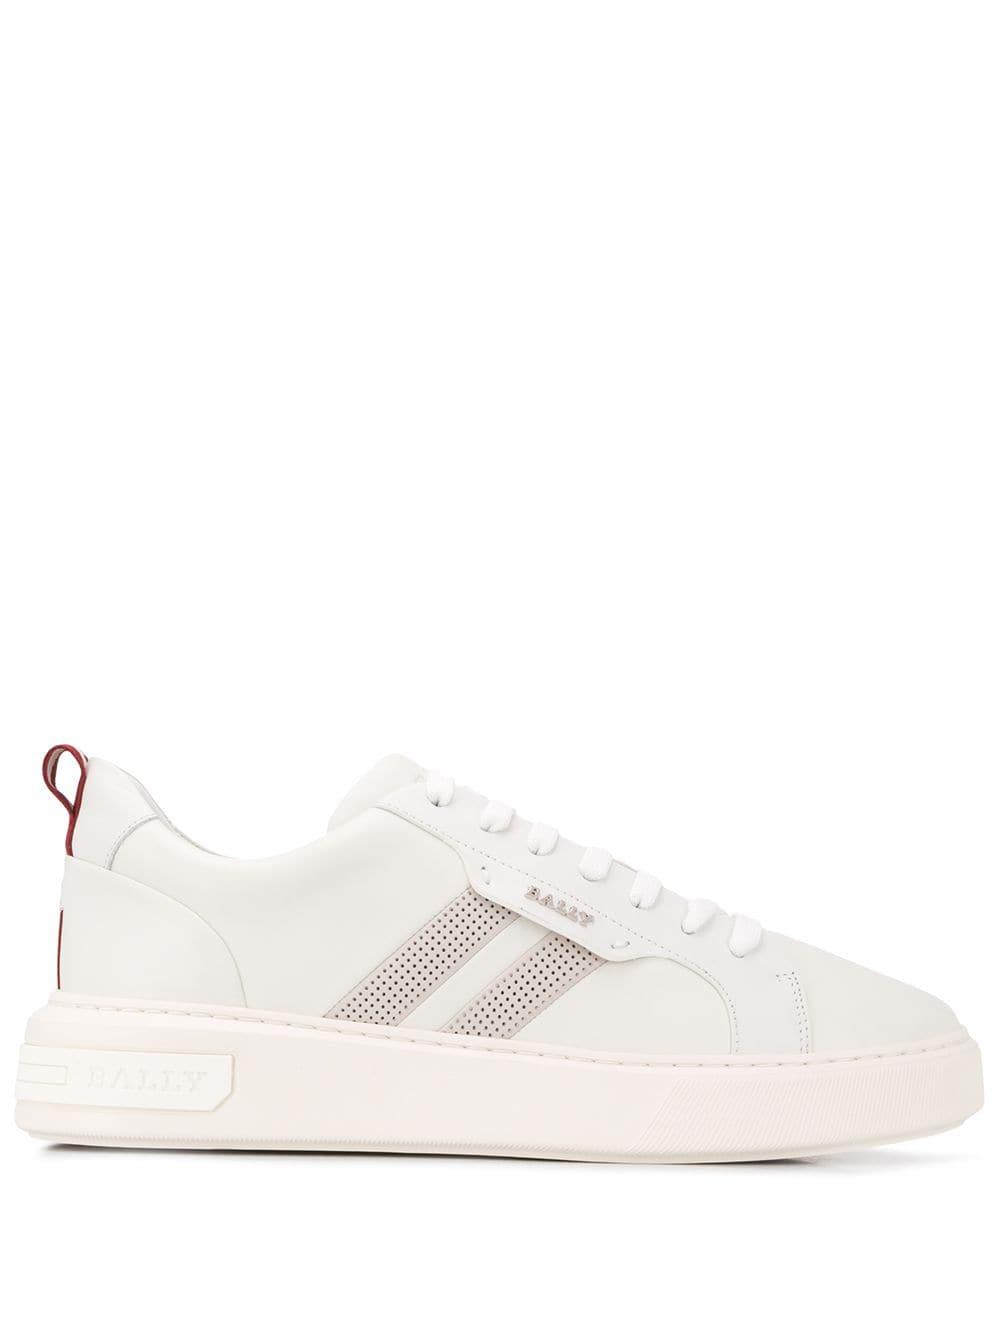 Bally Leather Maxim Low-top Sneakers in White for Men - Lyst